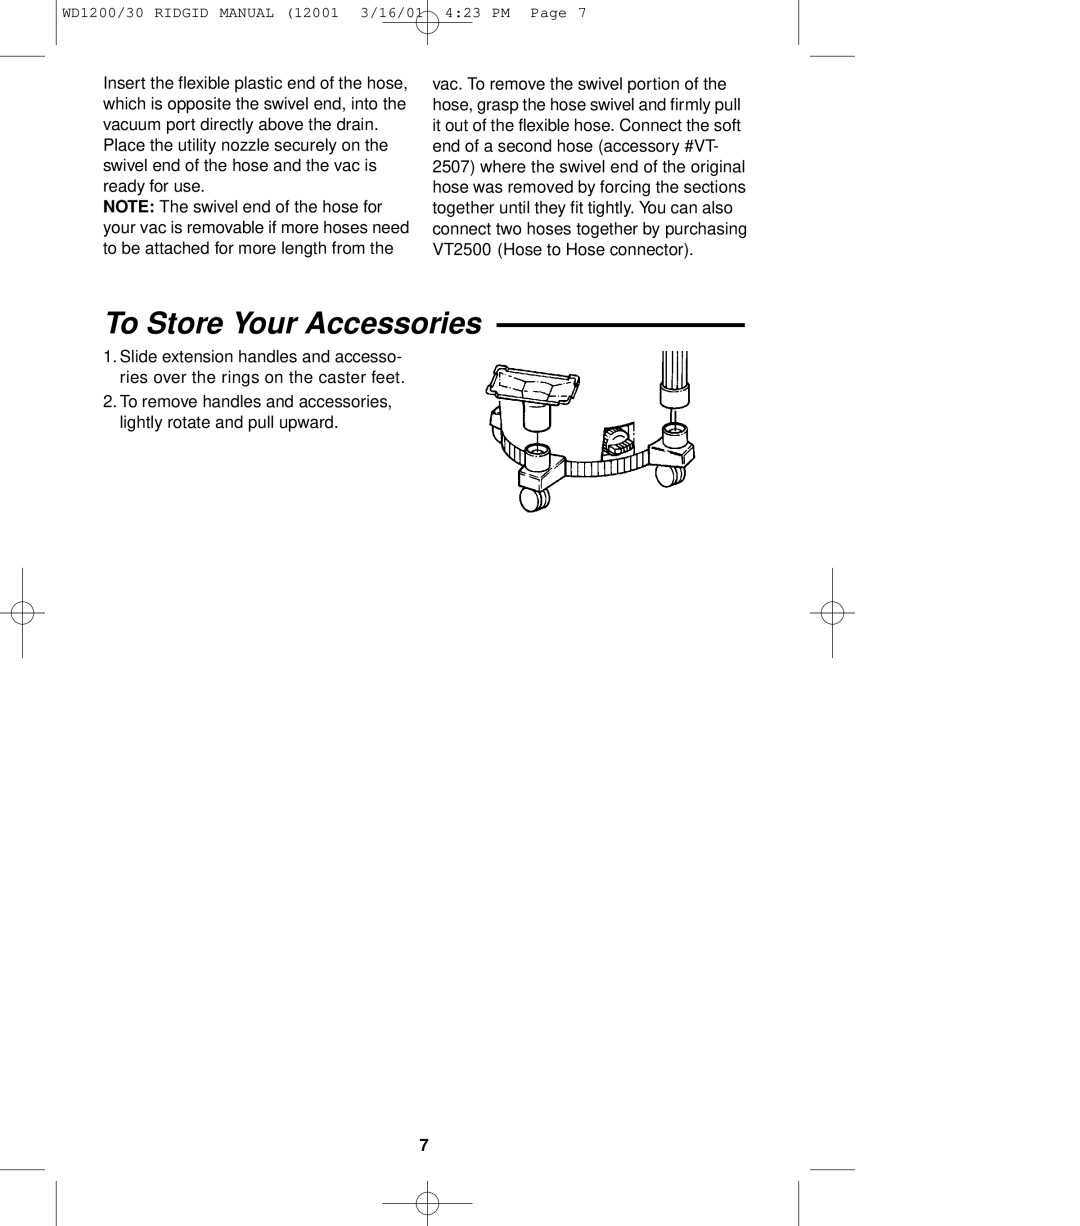 RIDGID WD1200, WD1230 owner manual To Store Your Accessories 